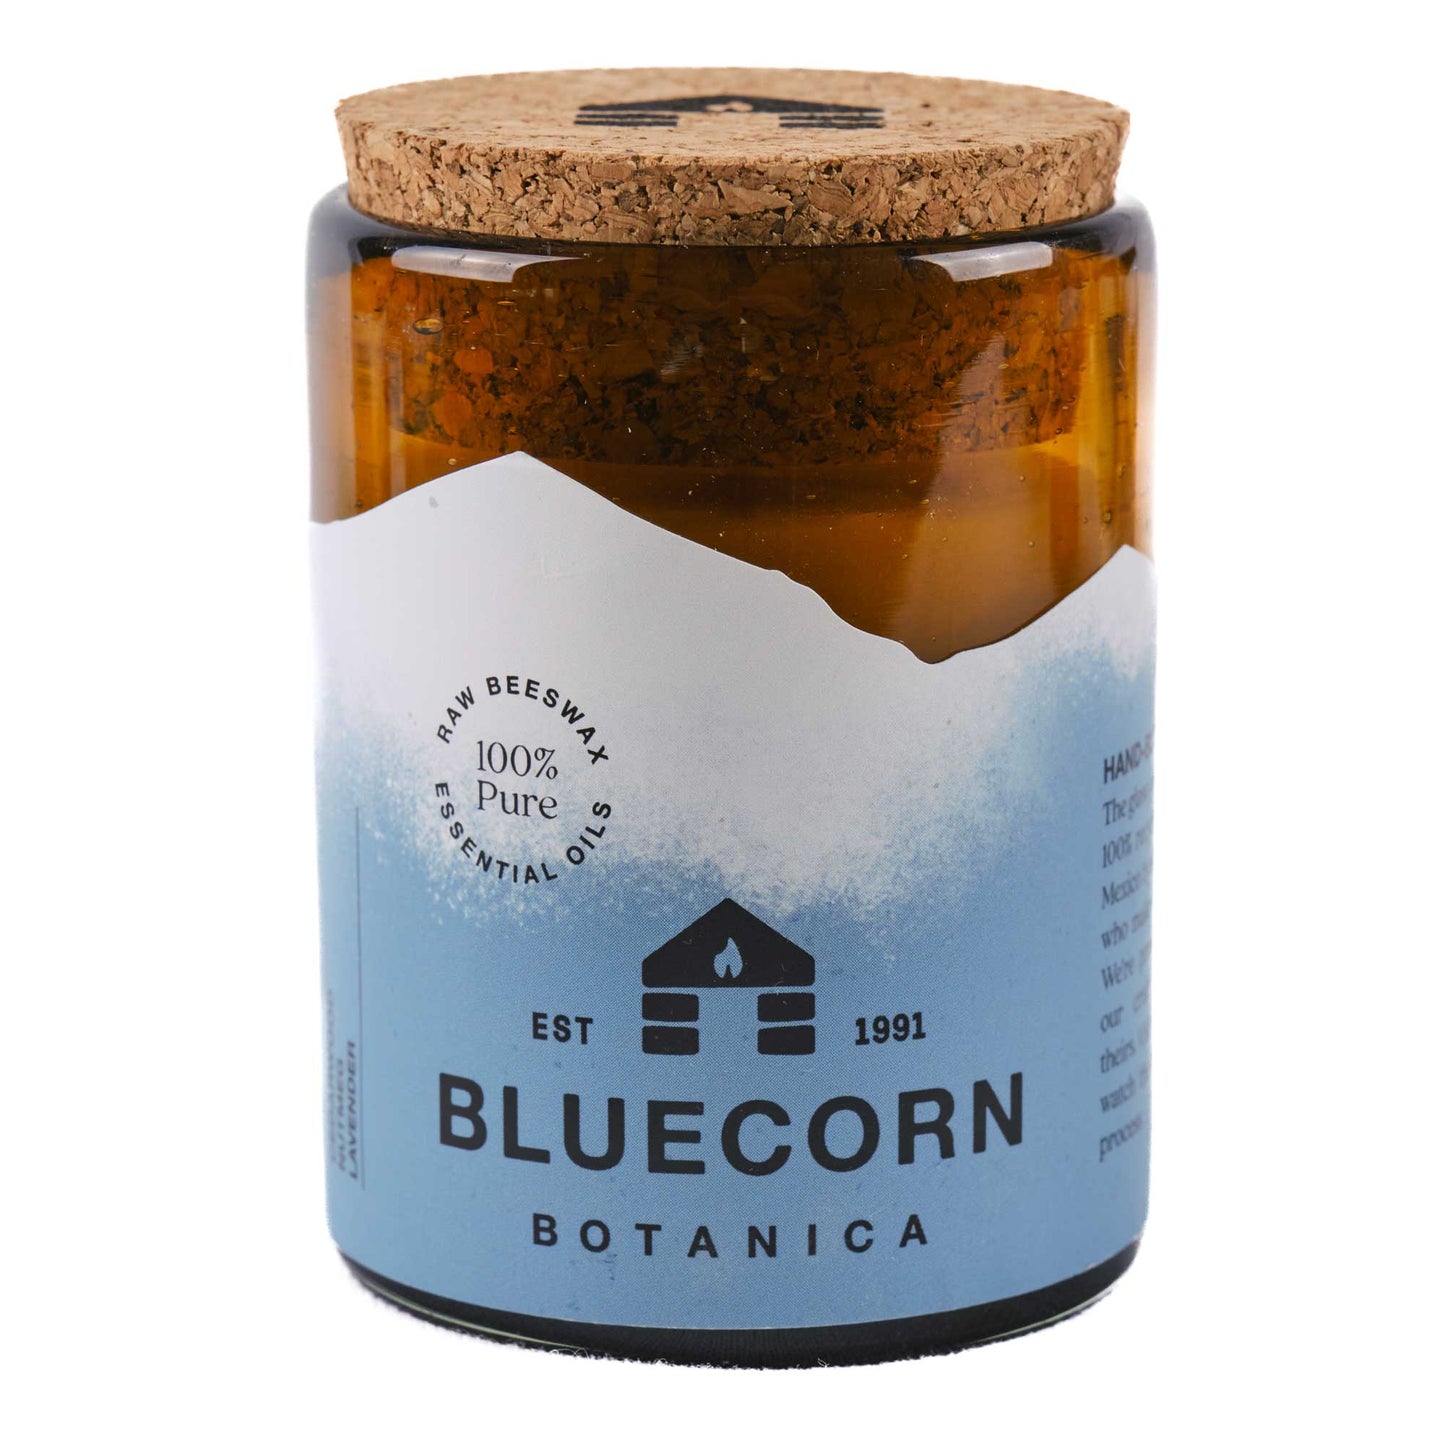 bluecorn candles - scented candle made with beeswax and pure essential oils of cedar wood, nutmeg and lavender